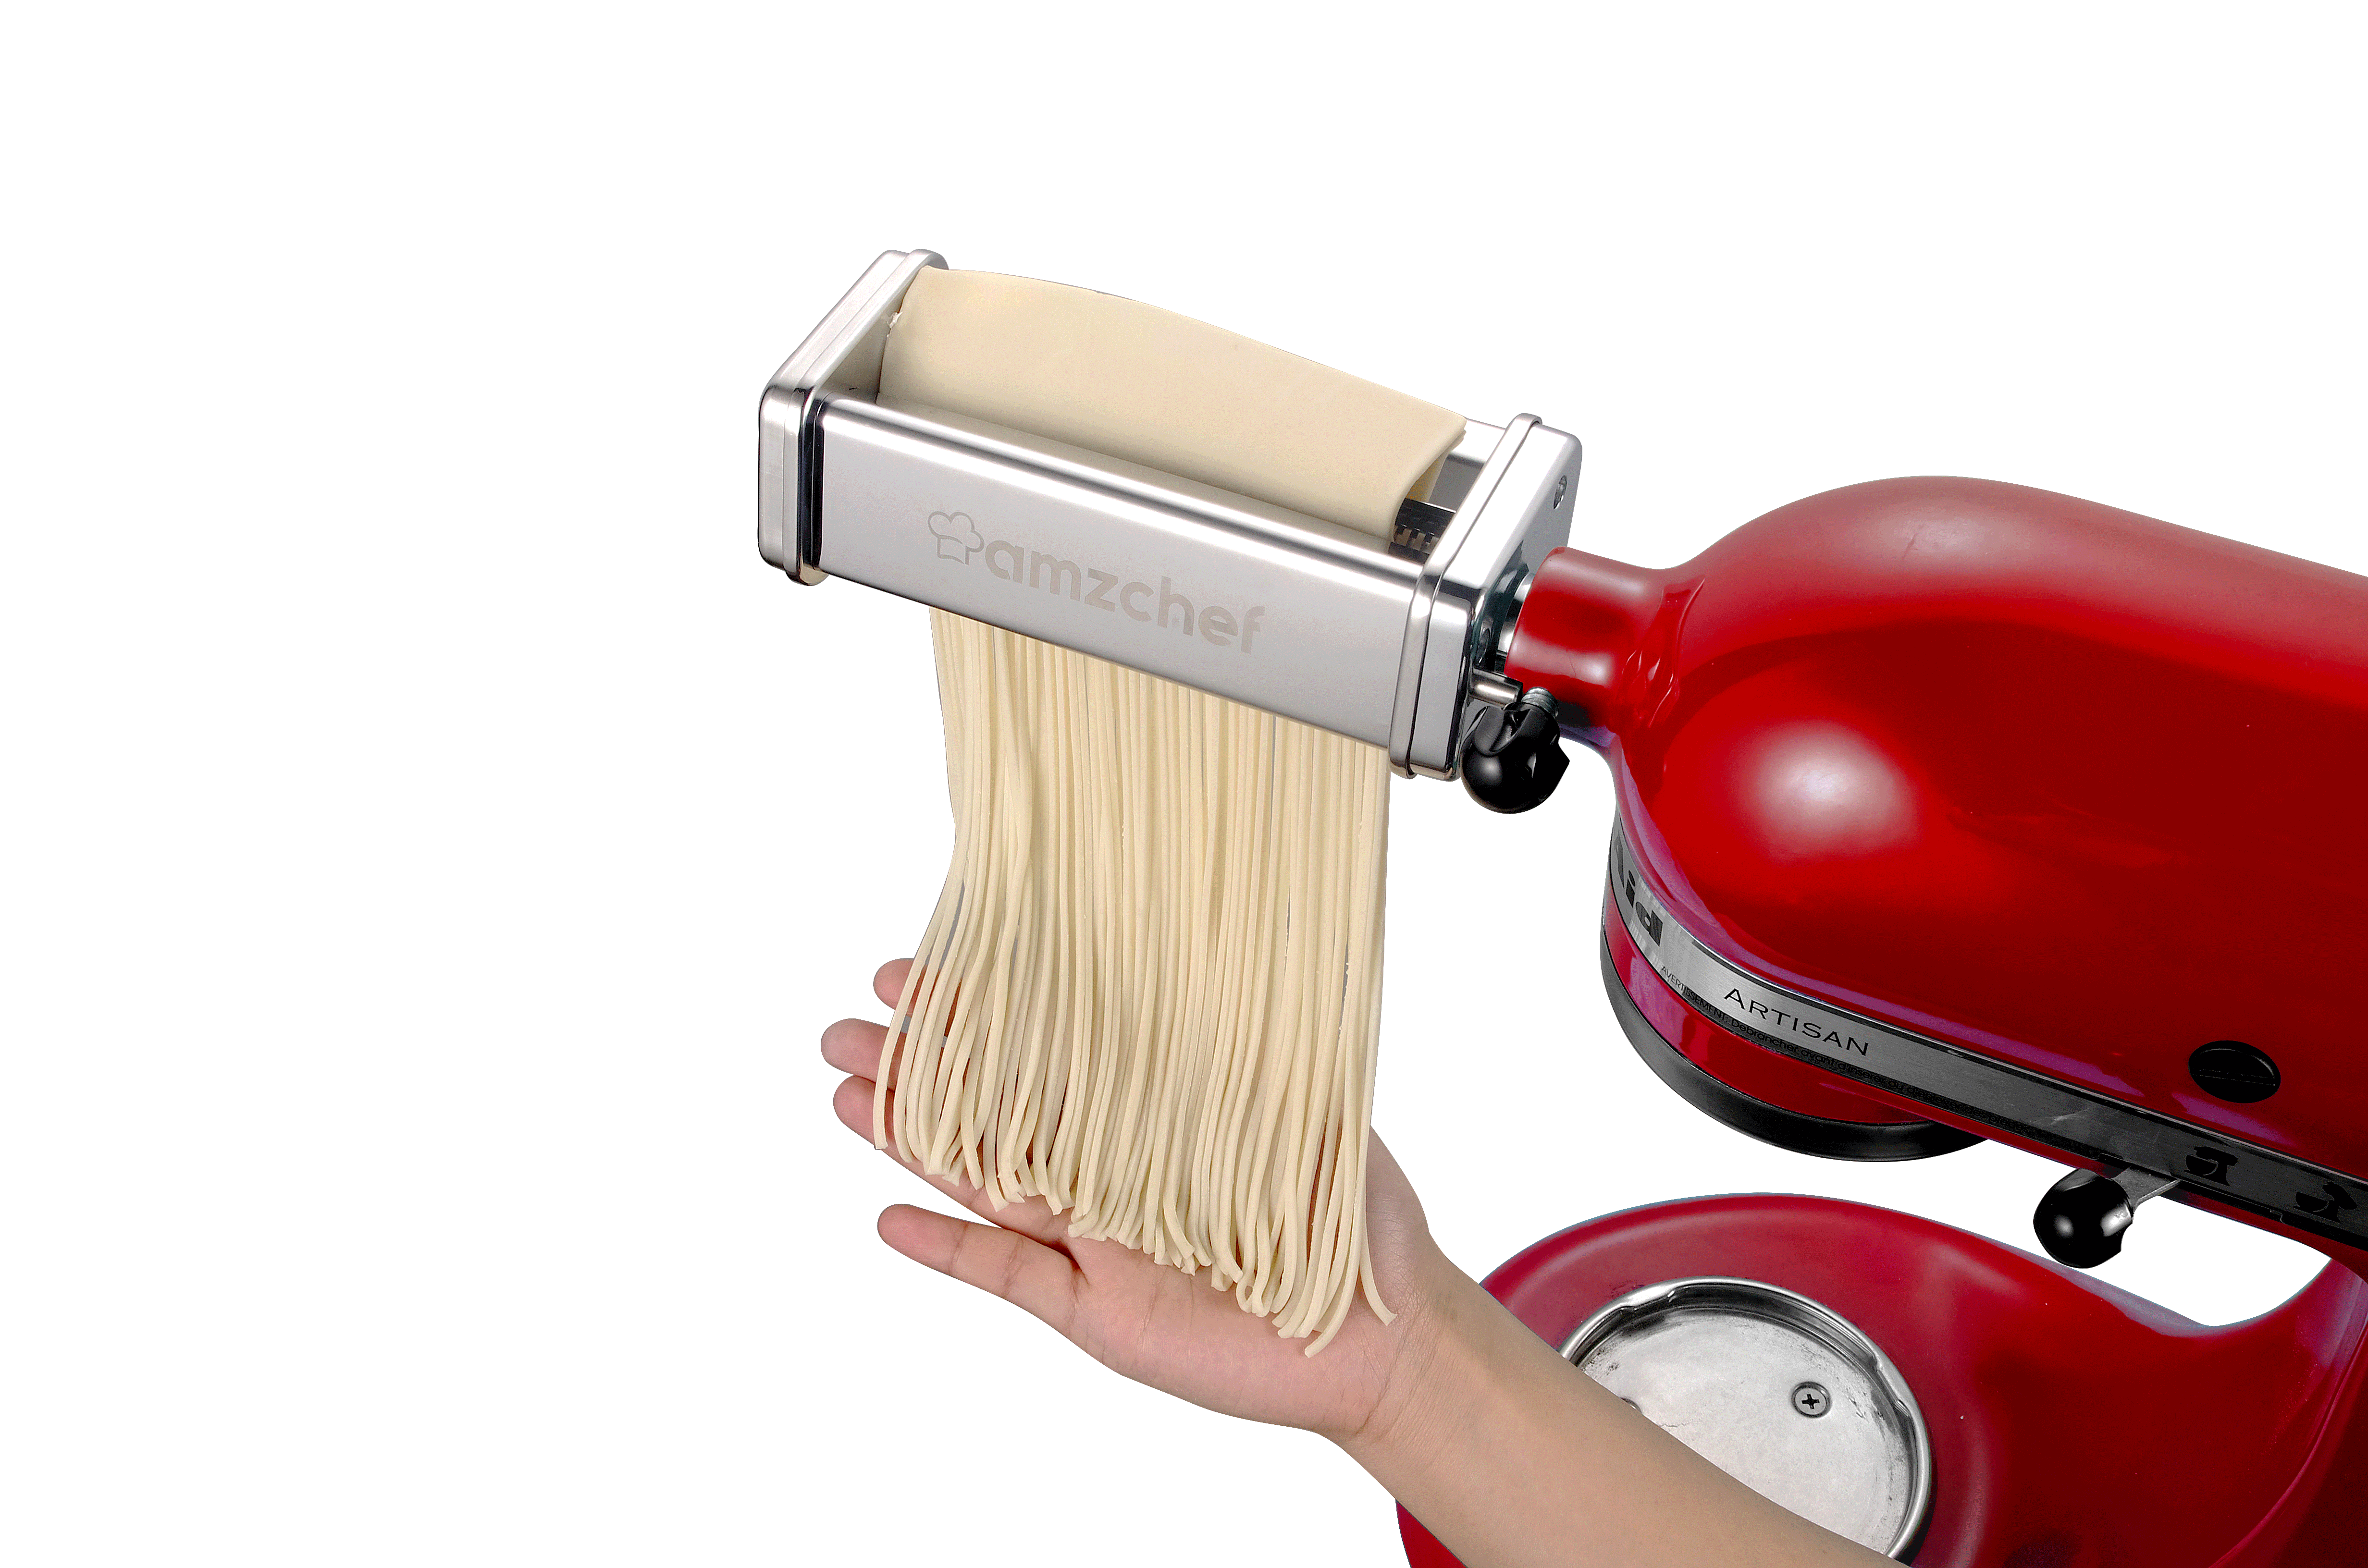 amzchef 3 in 1 Stainless Steel Pasta Roller and Cutter Attachment